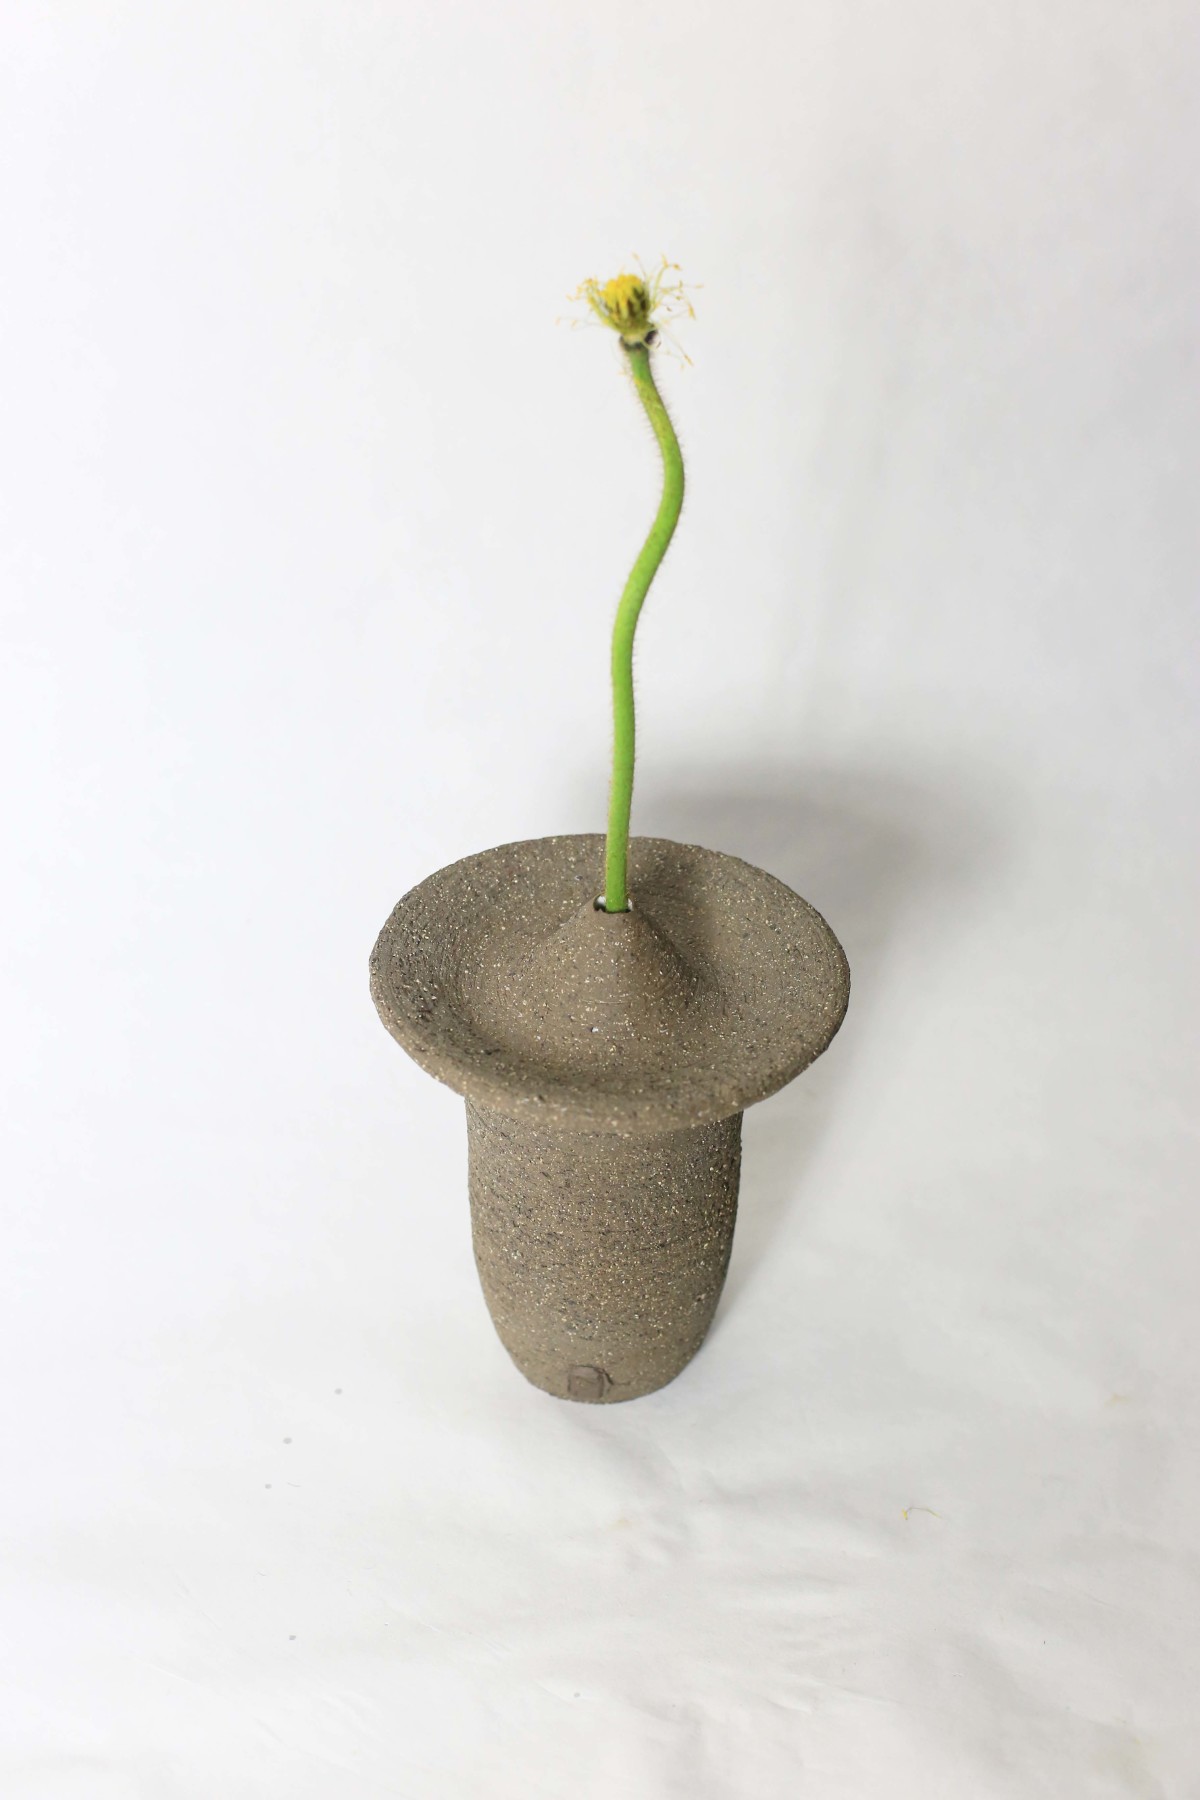 Ufo shaped gray ceramic vase with a flower stem on a white background view from above